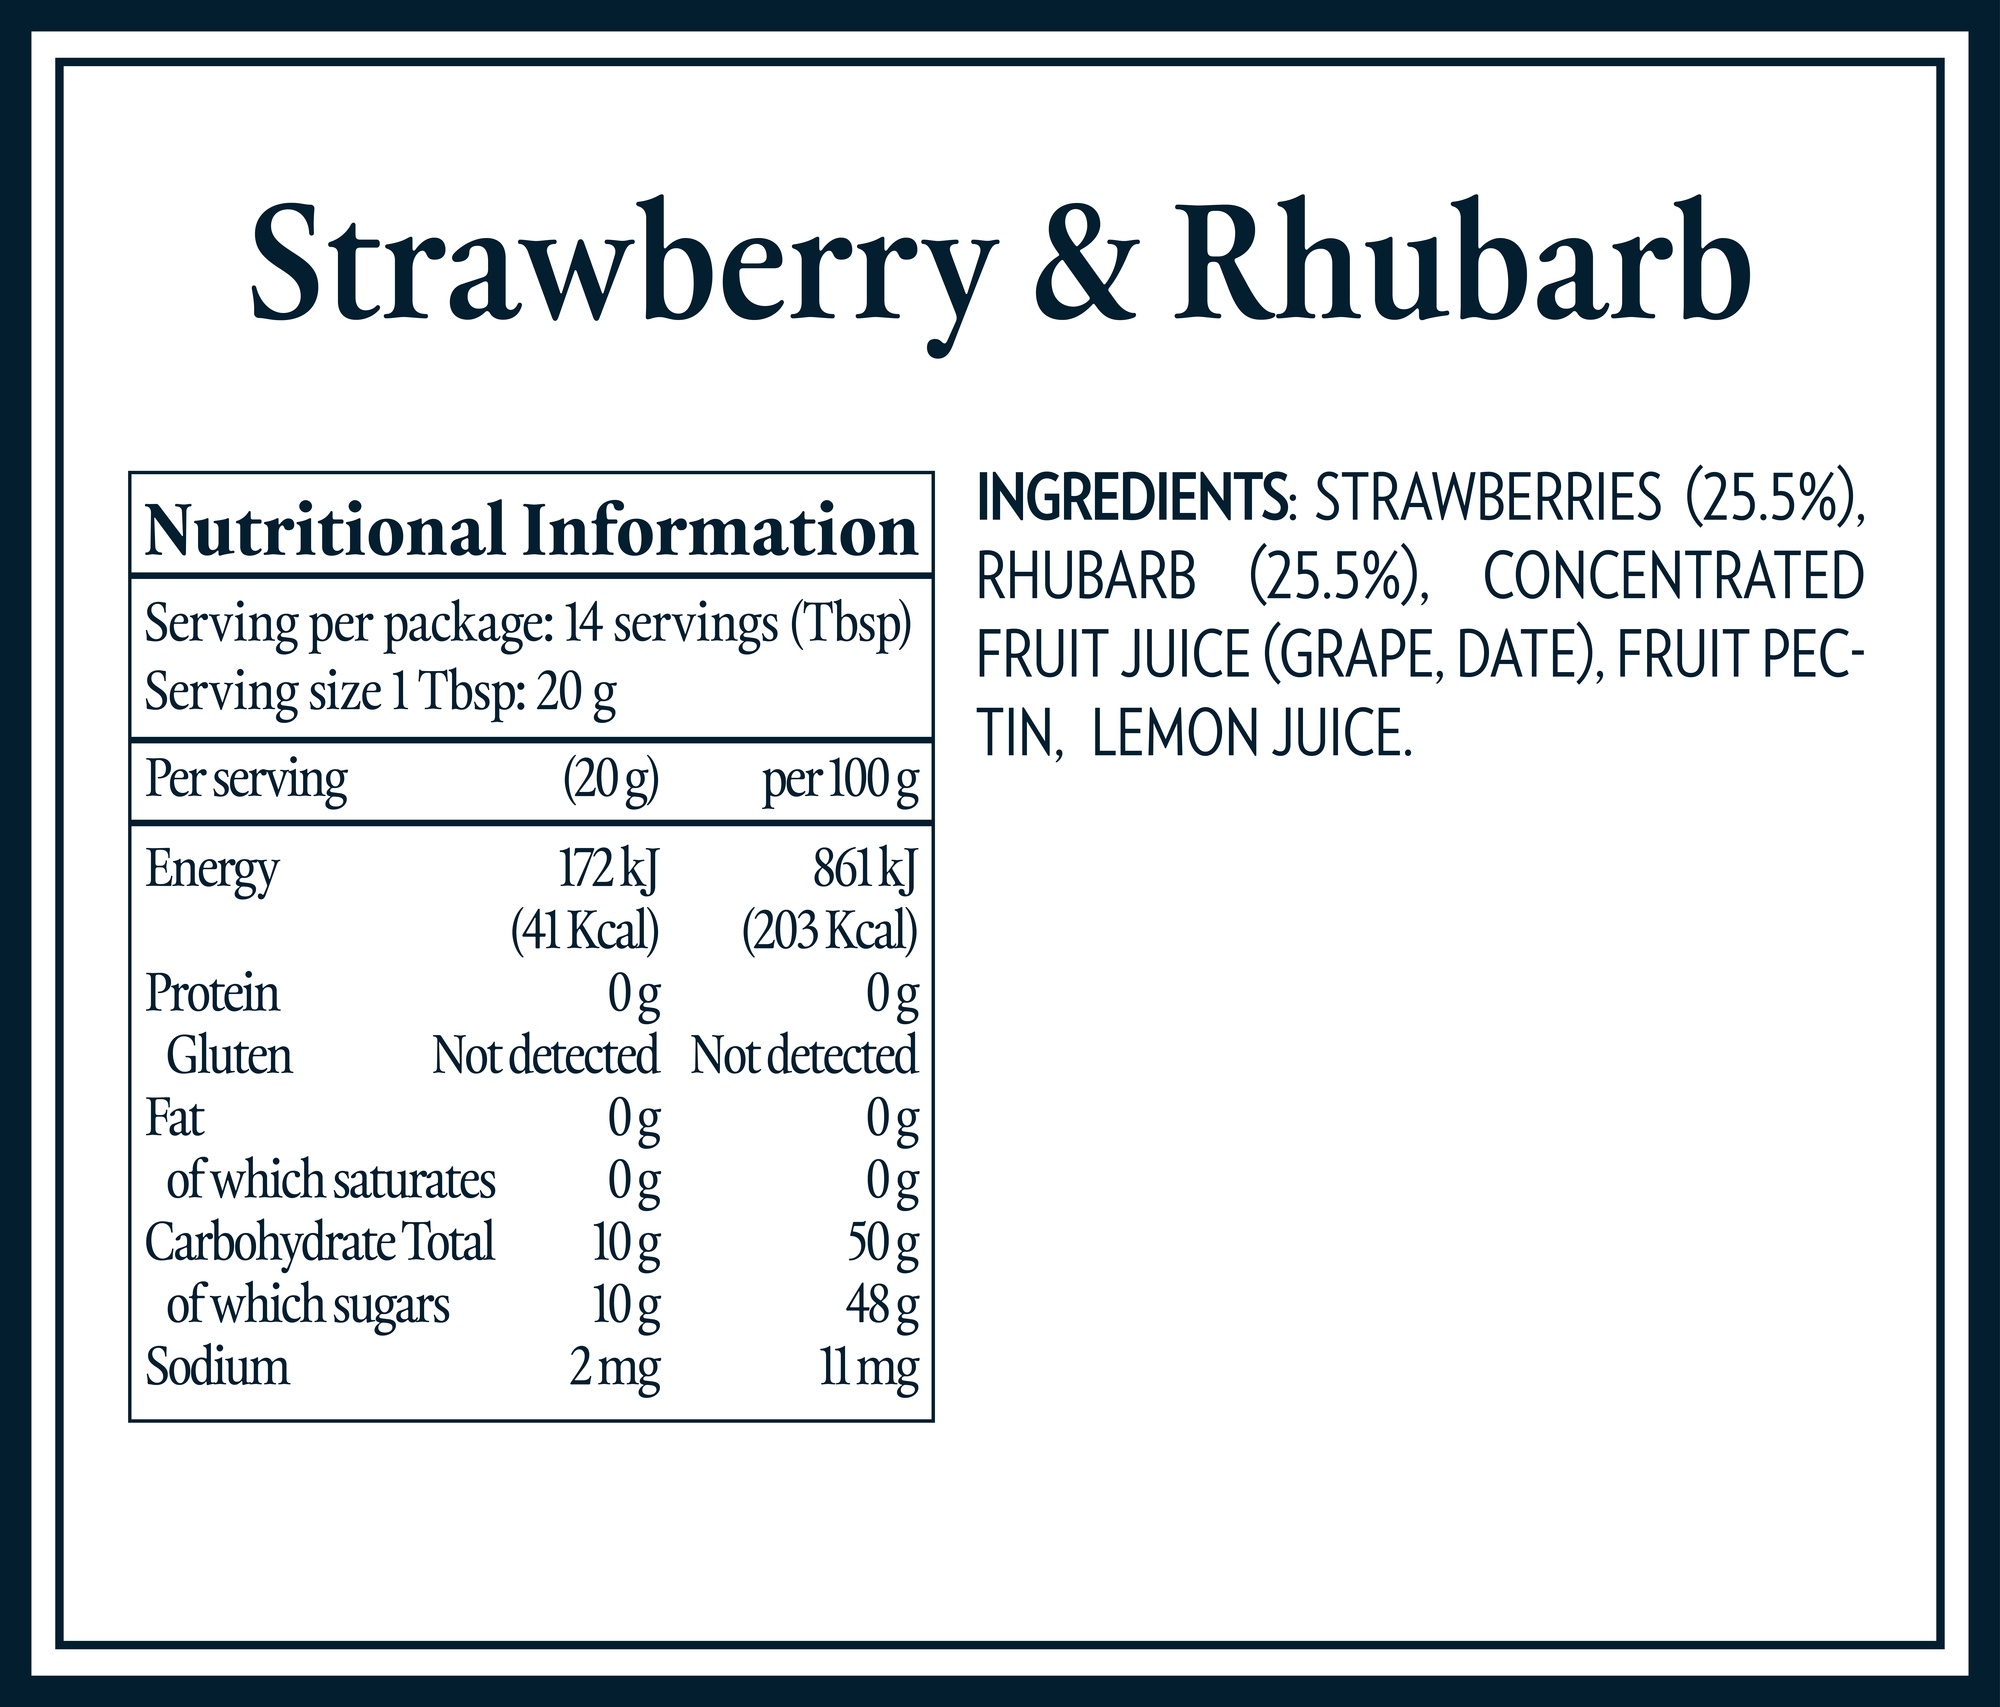 Nutrition Tables & Ingredients 2_AUS_strawberry & rhubarb